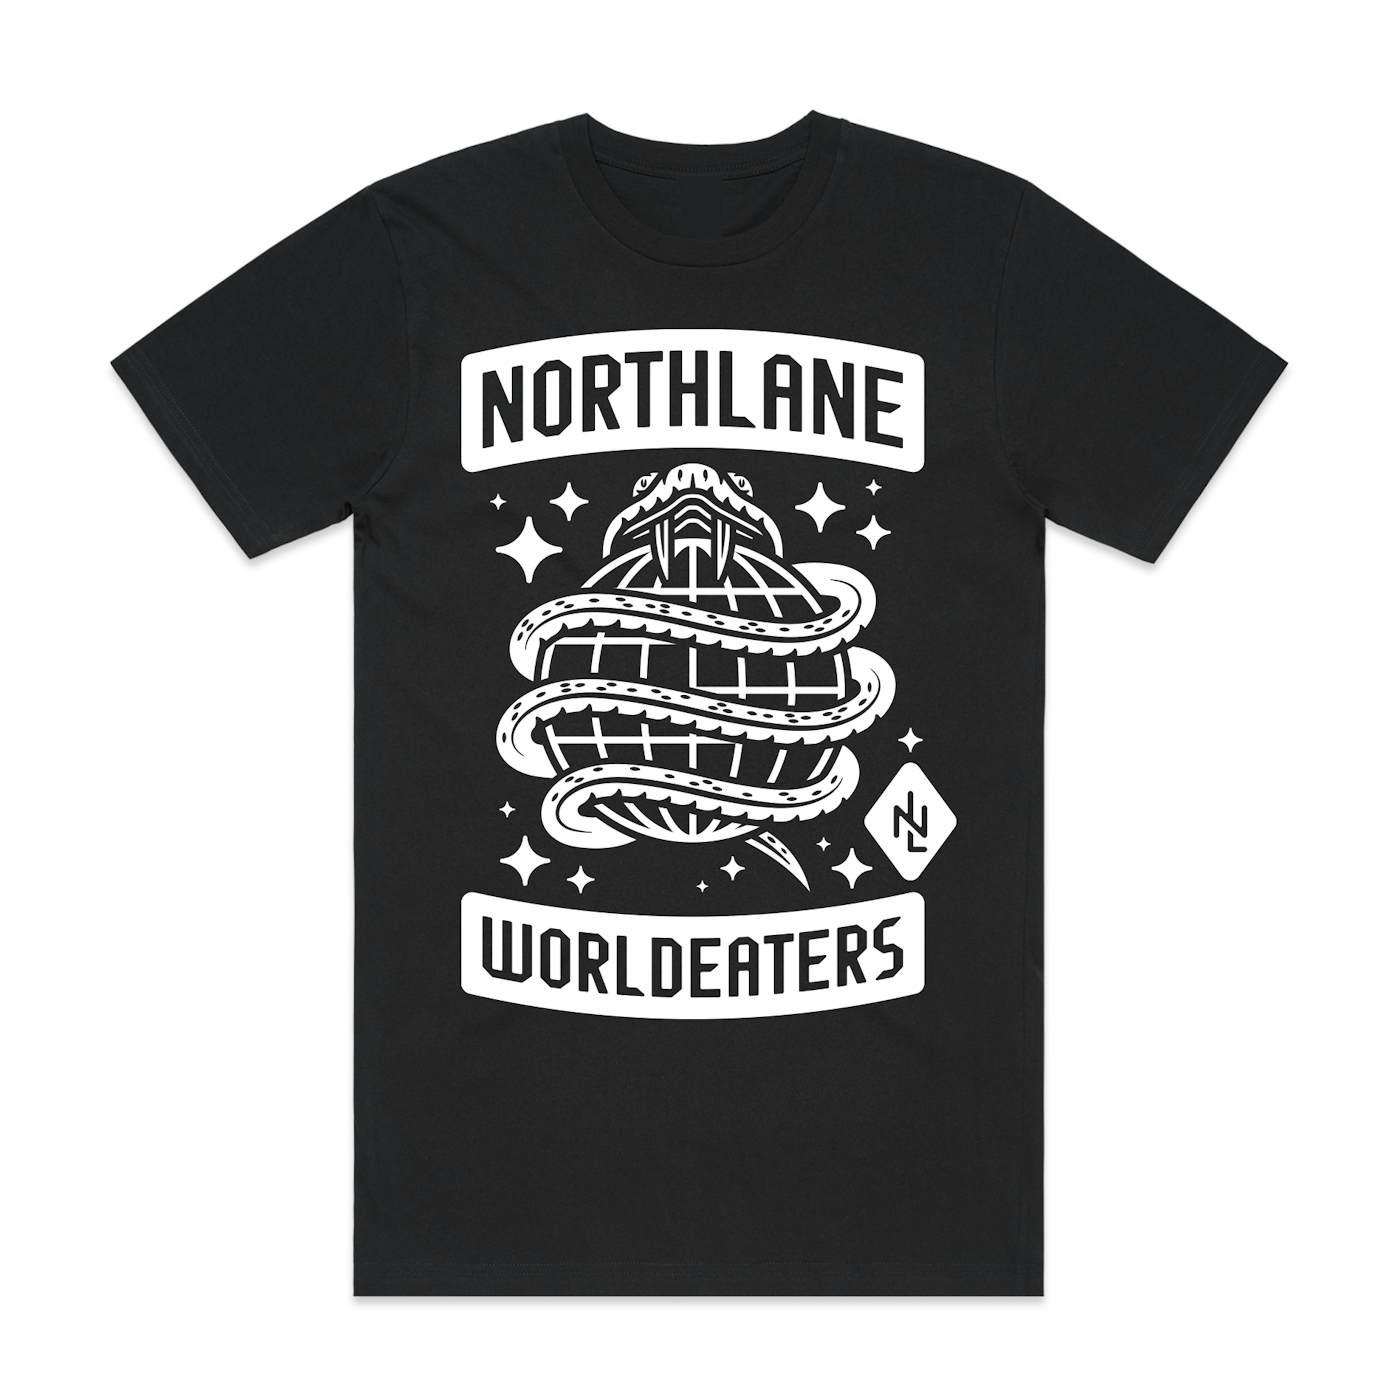 Northlane WORLDEATERS T-SHIRT